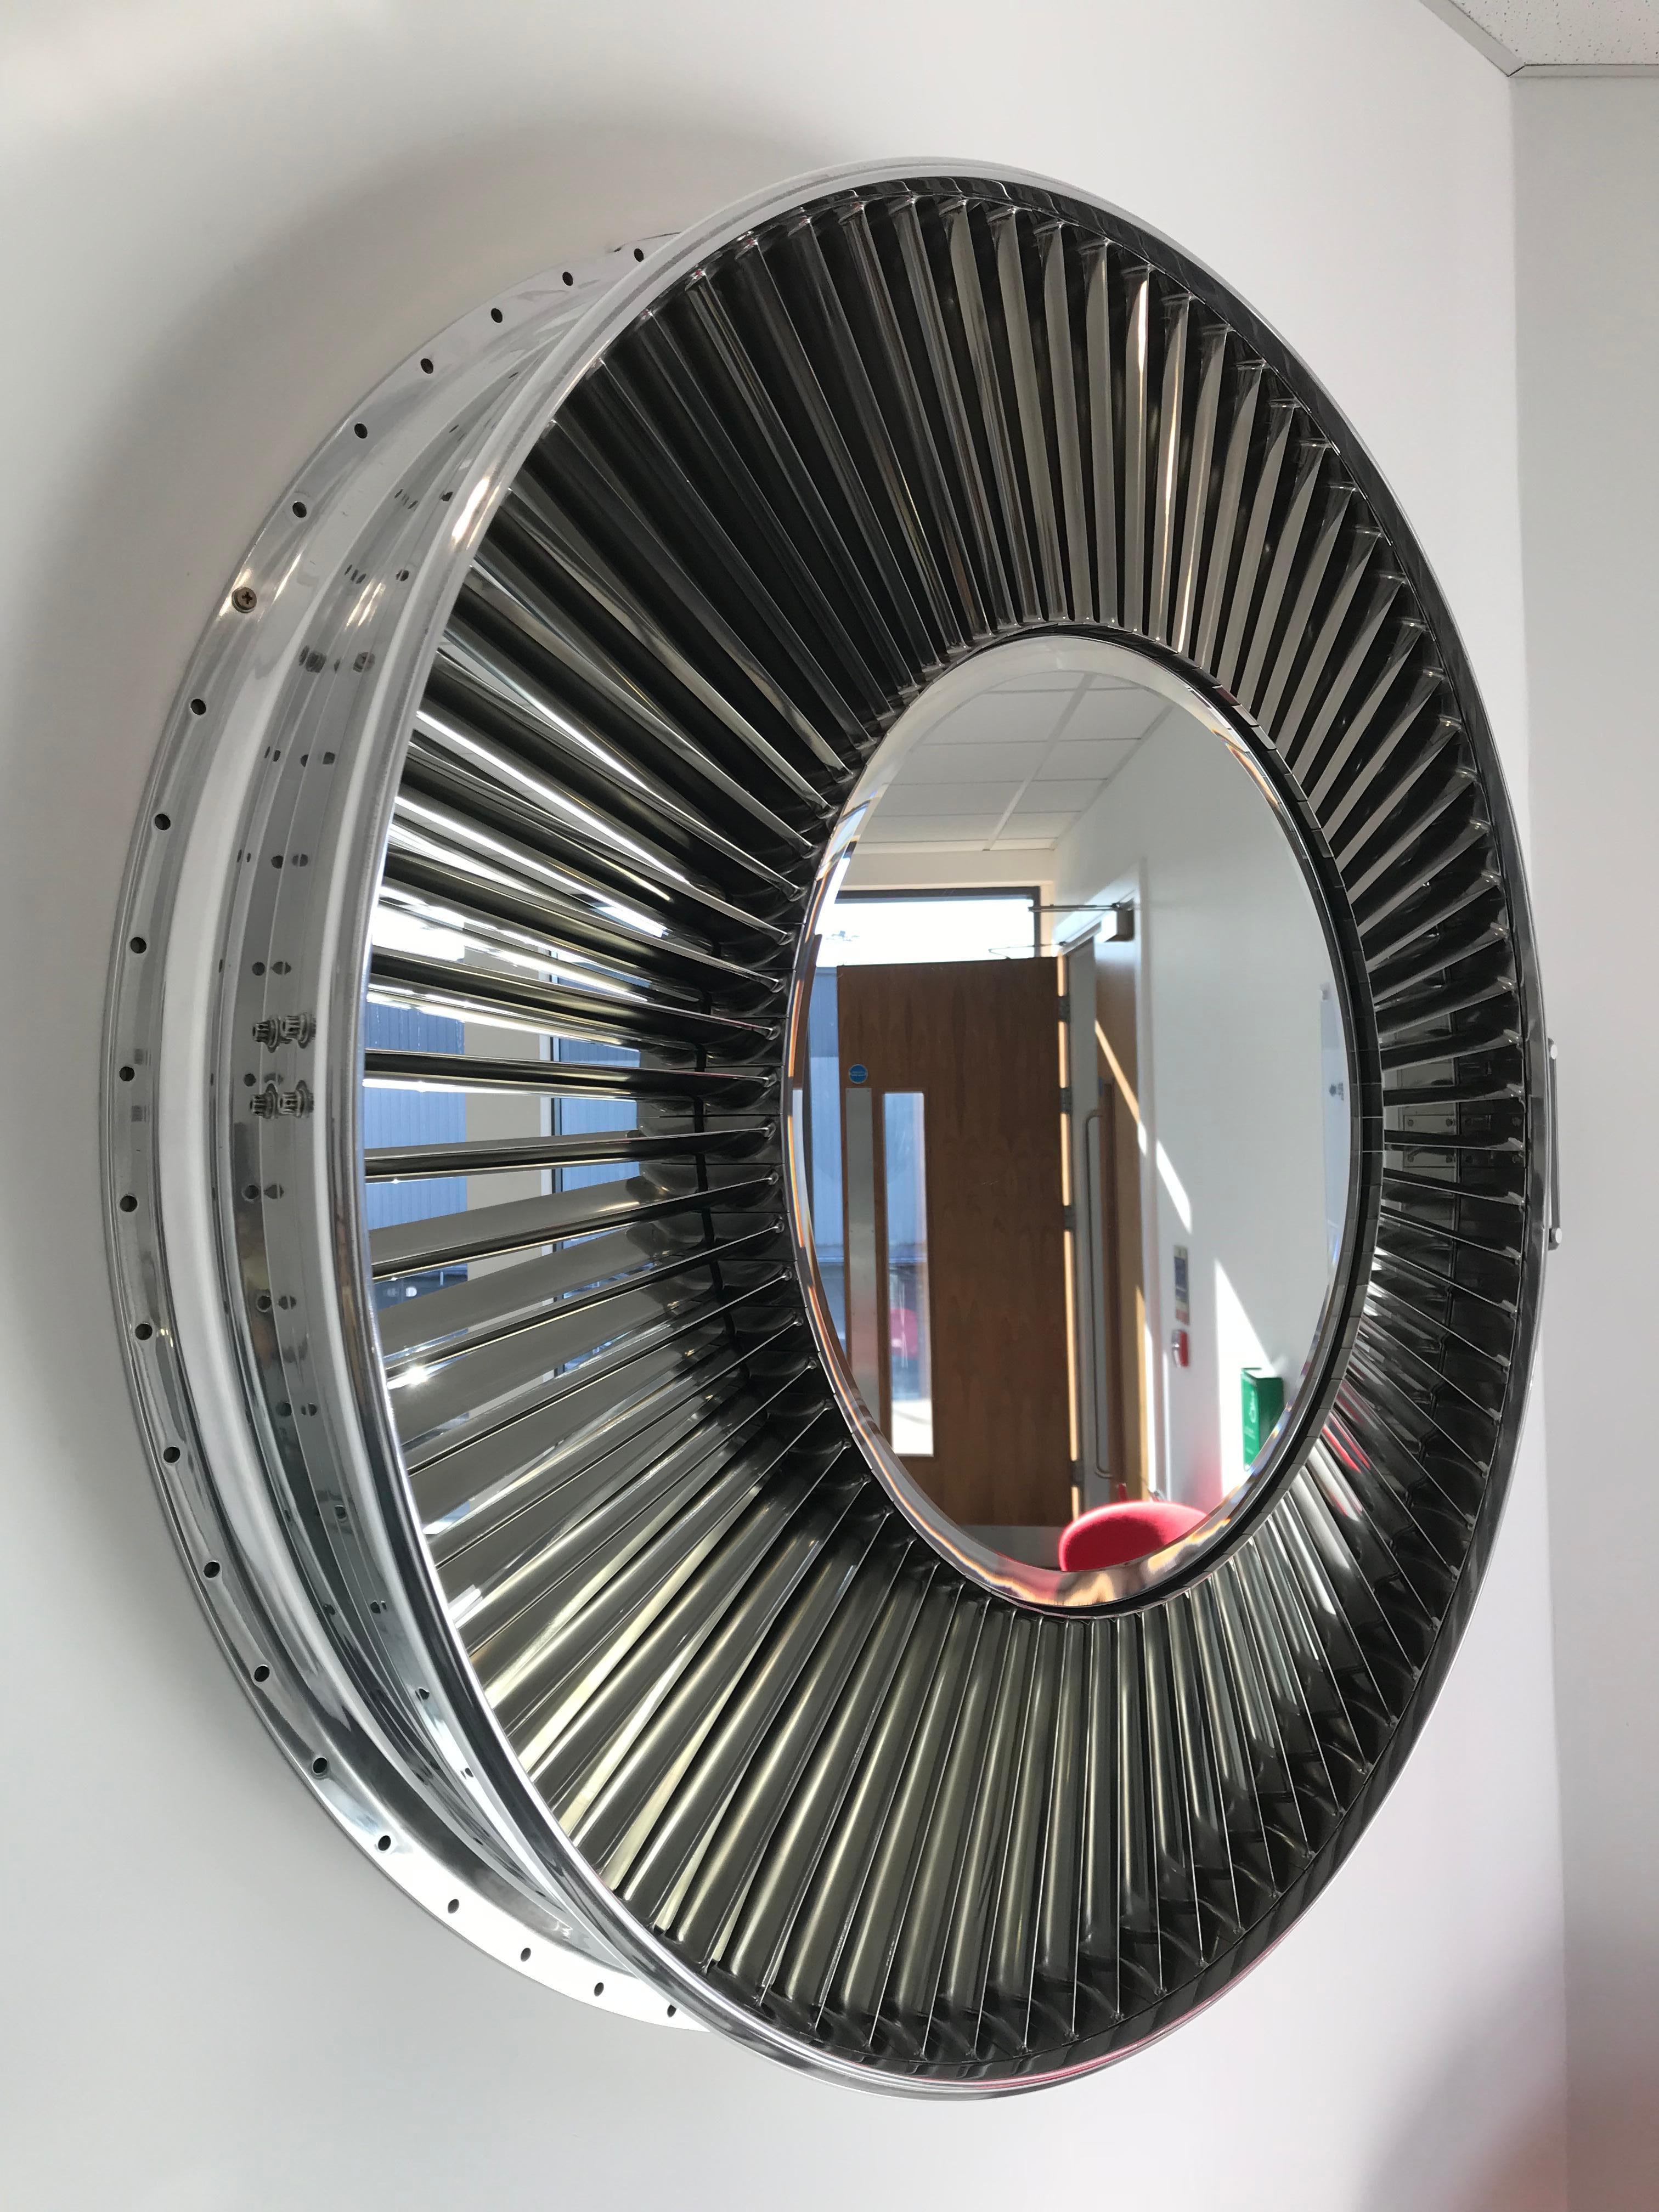 Crafted from a Pegasus (Sea Harrier Jump Jet) original engine casing, our skilled craftsmen have created a very detailed, highly polished mirror.
The piece comprises two mirrors, one central and one behind the 74 individually polished titanium